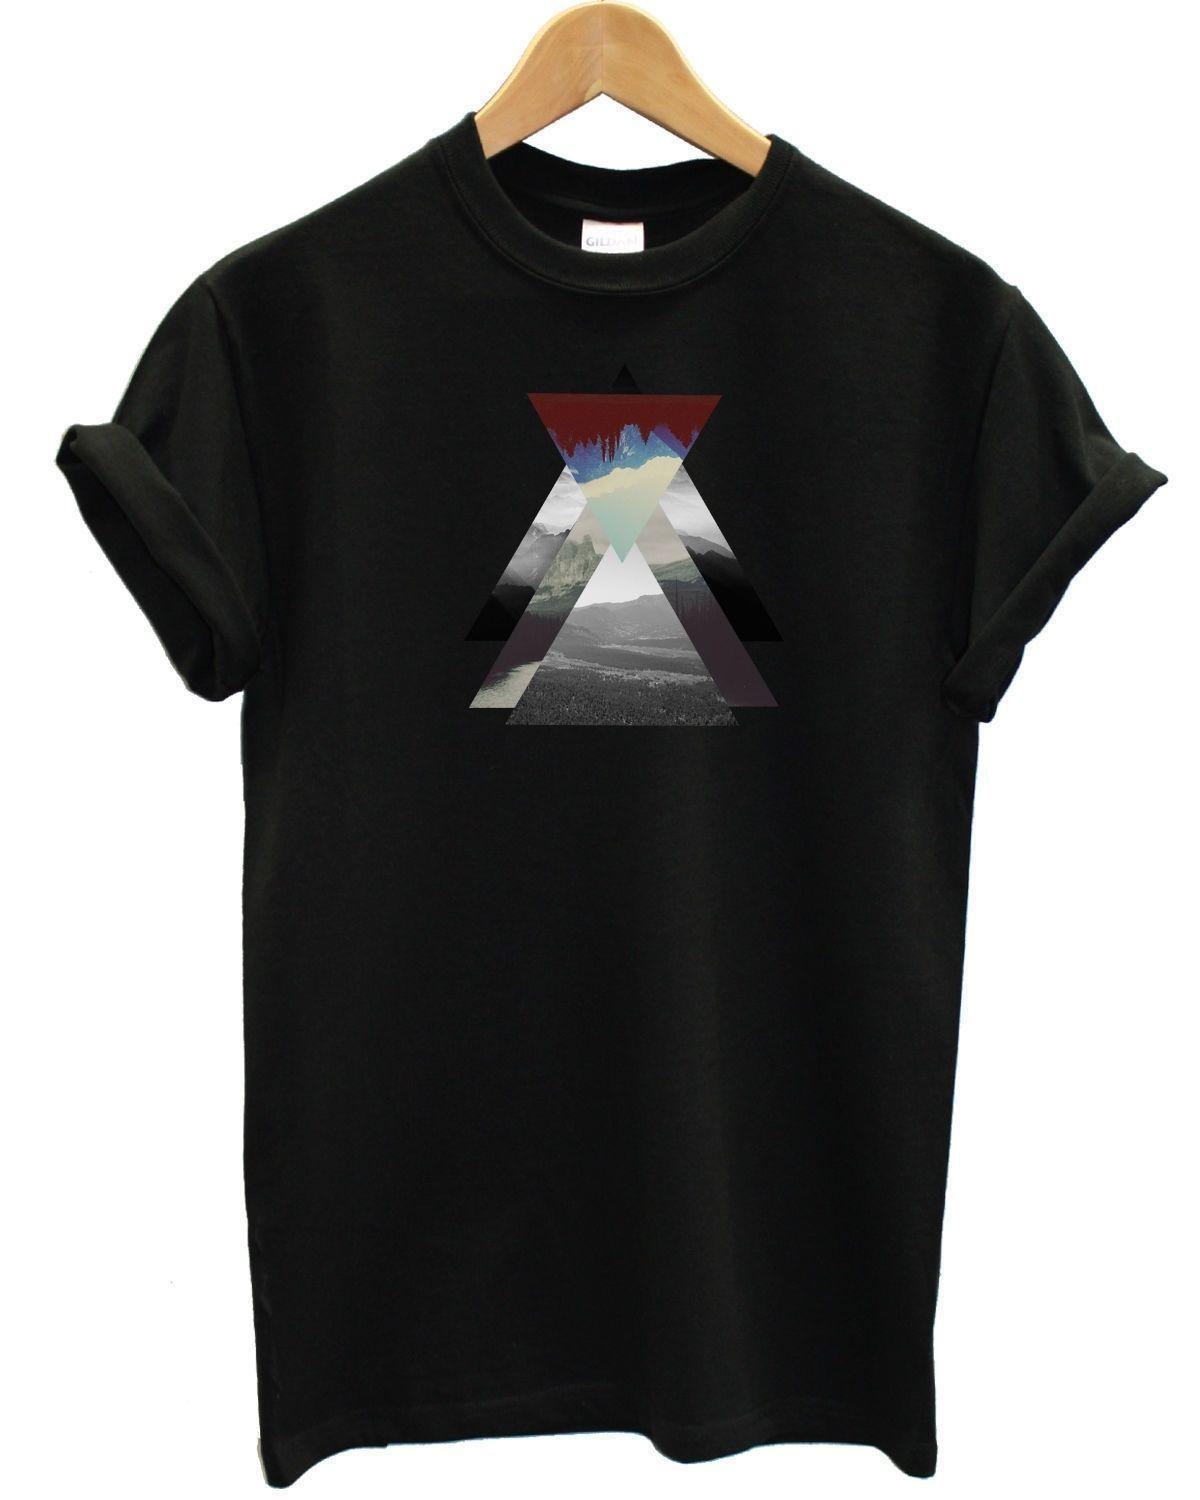 Hipster Mountain Triangle Logo - Mountain Triangle Printed T Shirt Fashion Hipster Indie Tumblr Swag